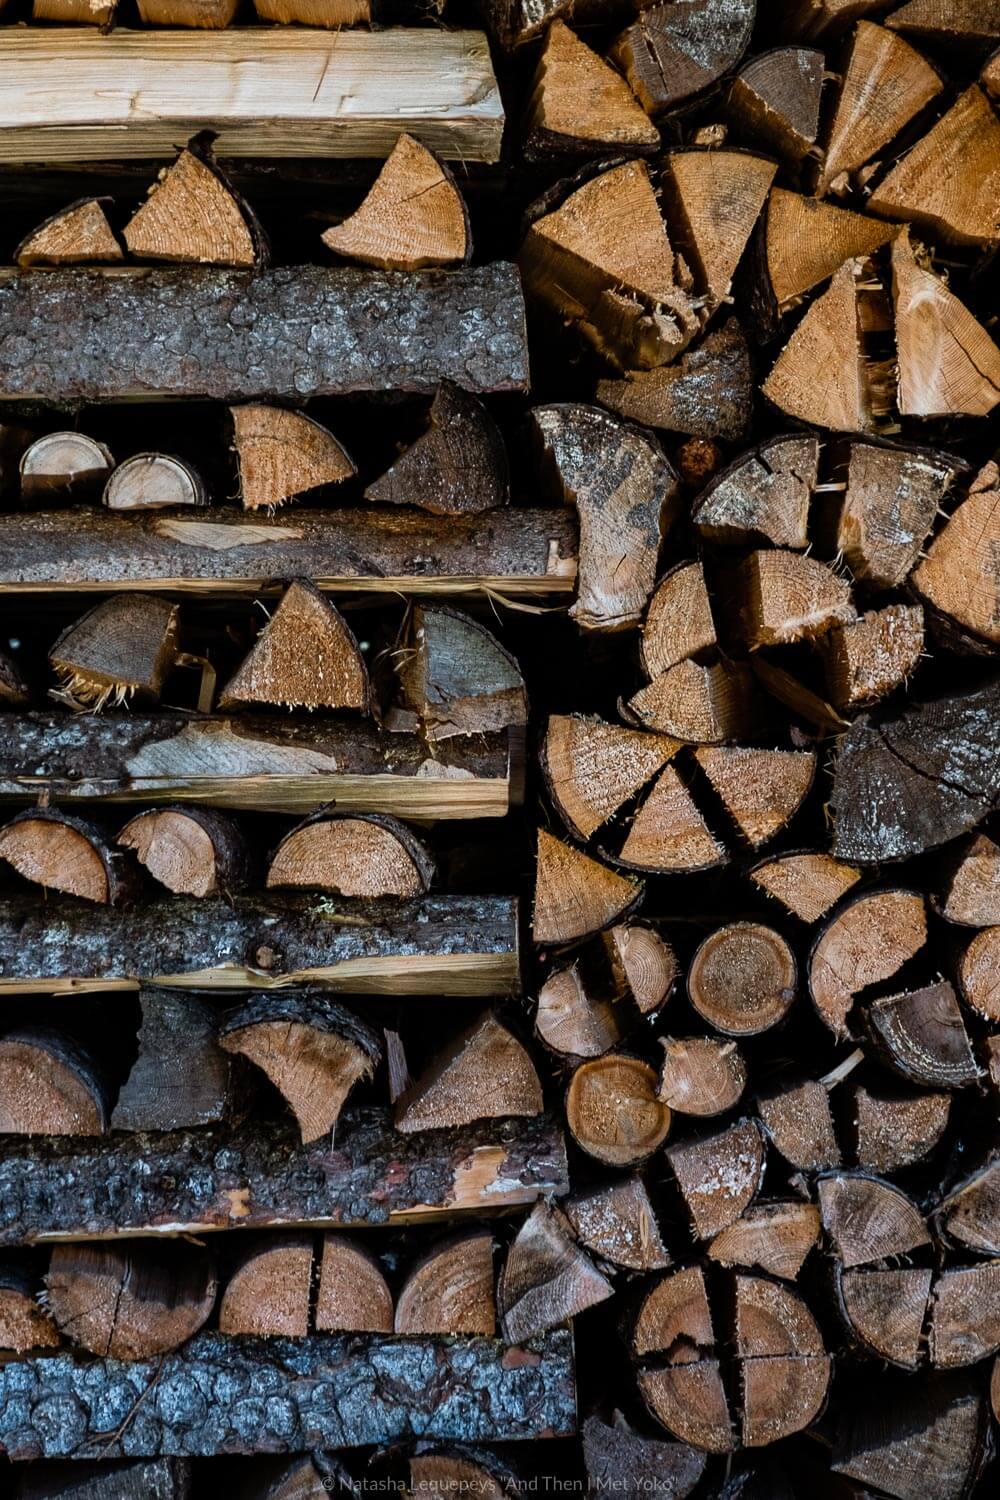 Stacks of chopped wood. Travel photography and guide by © Natasha Lequepeys for "And Then I Met Yoko". #wengen #jungfrau #travelphotography #switzerland